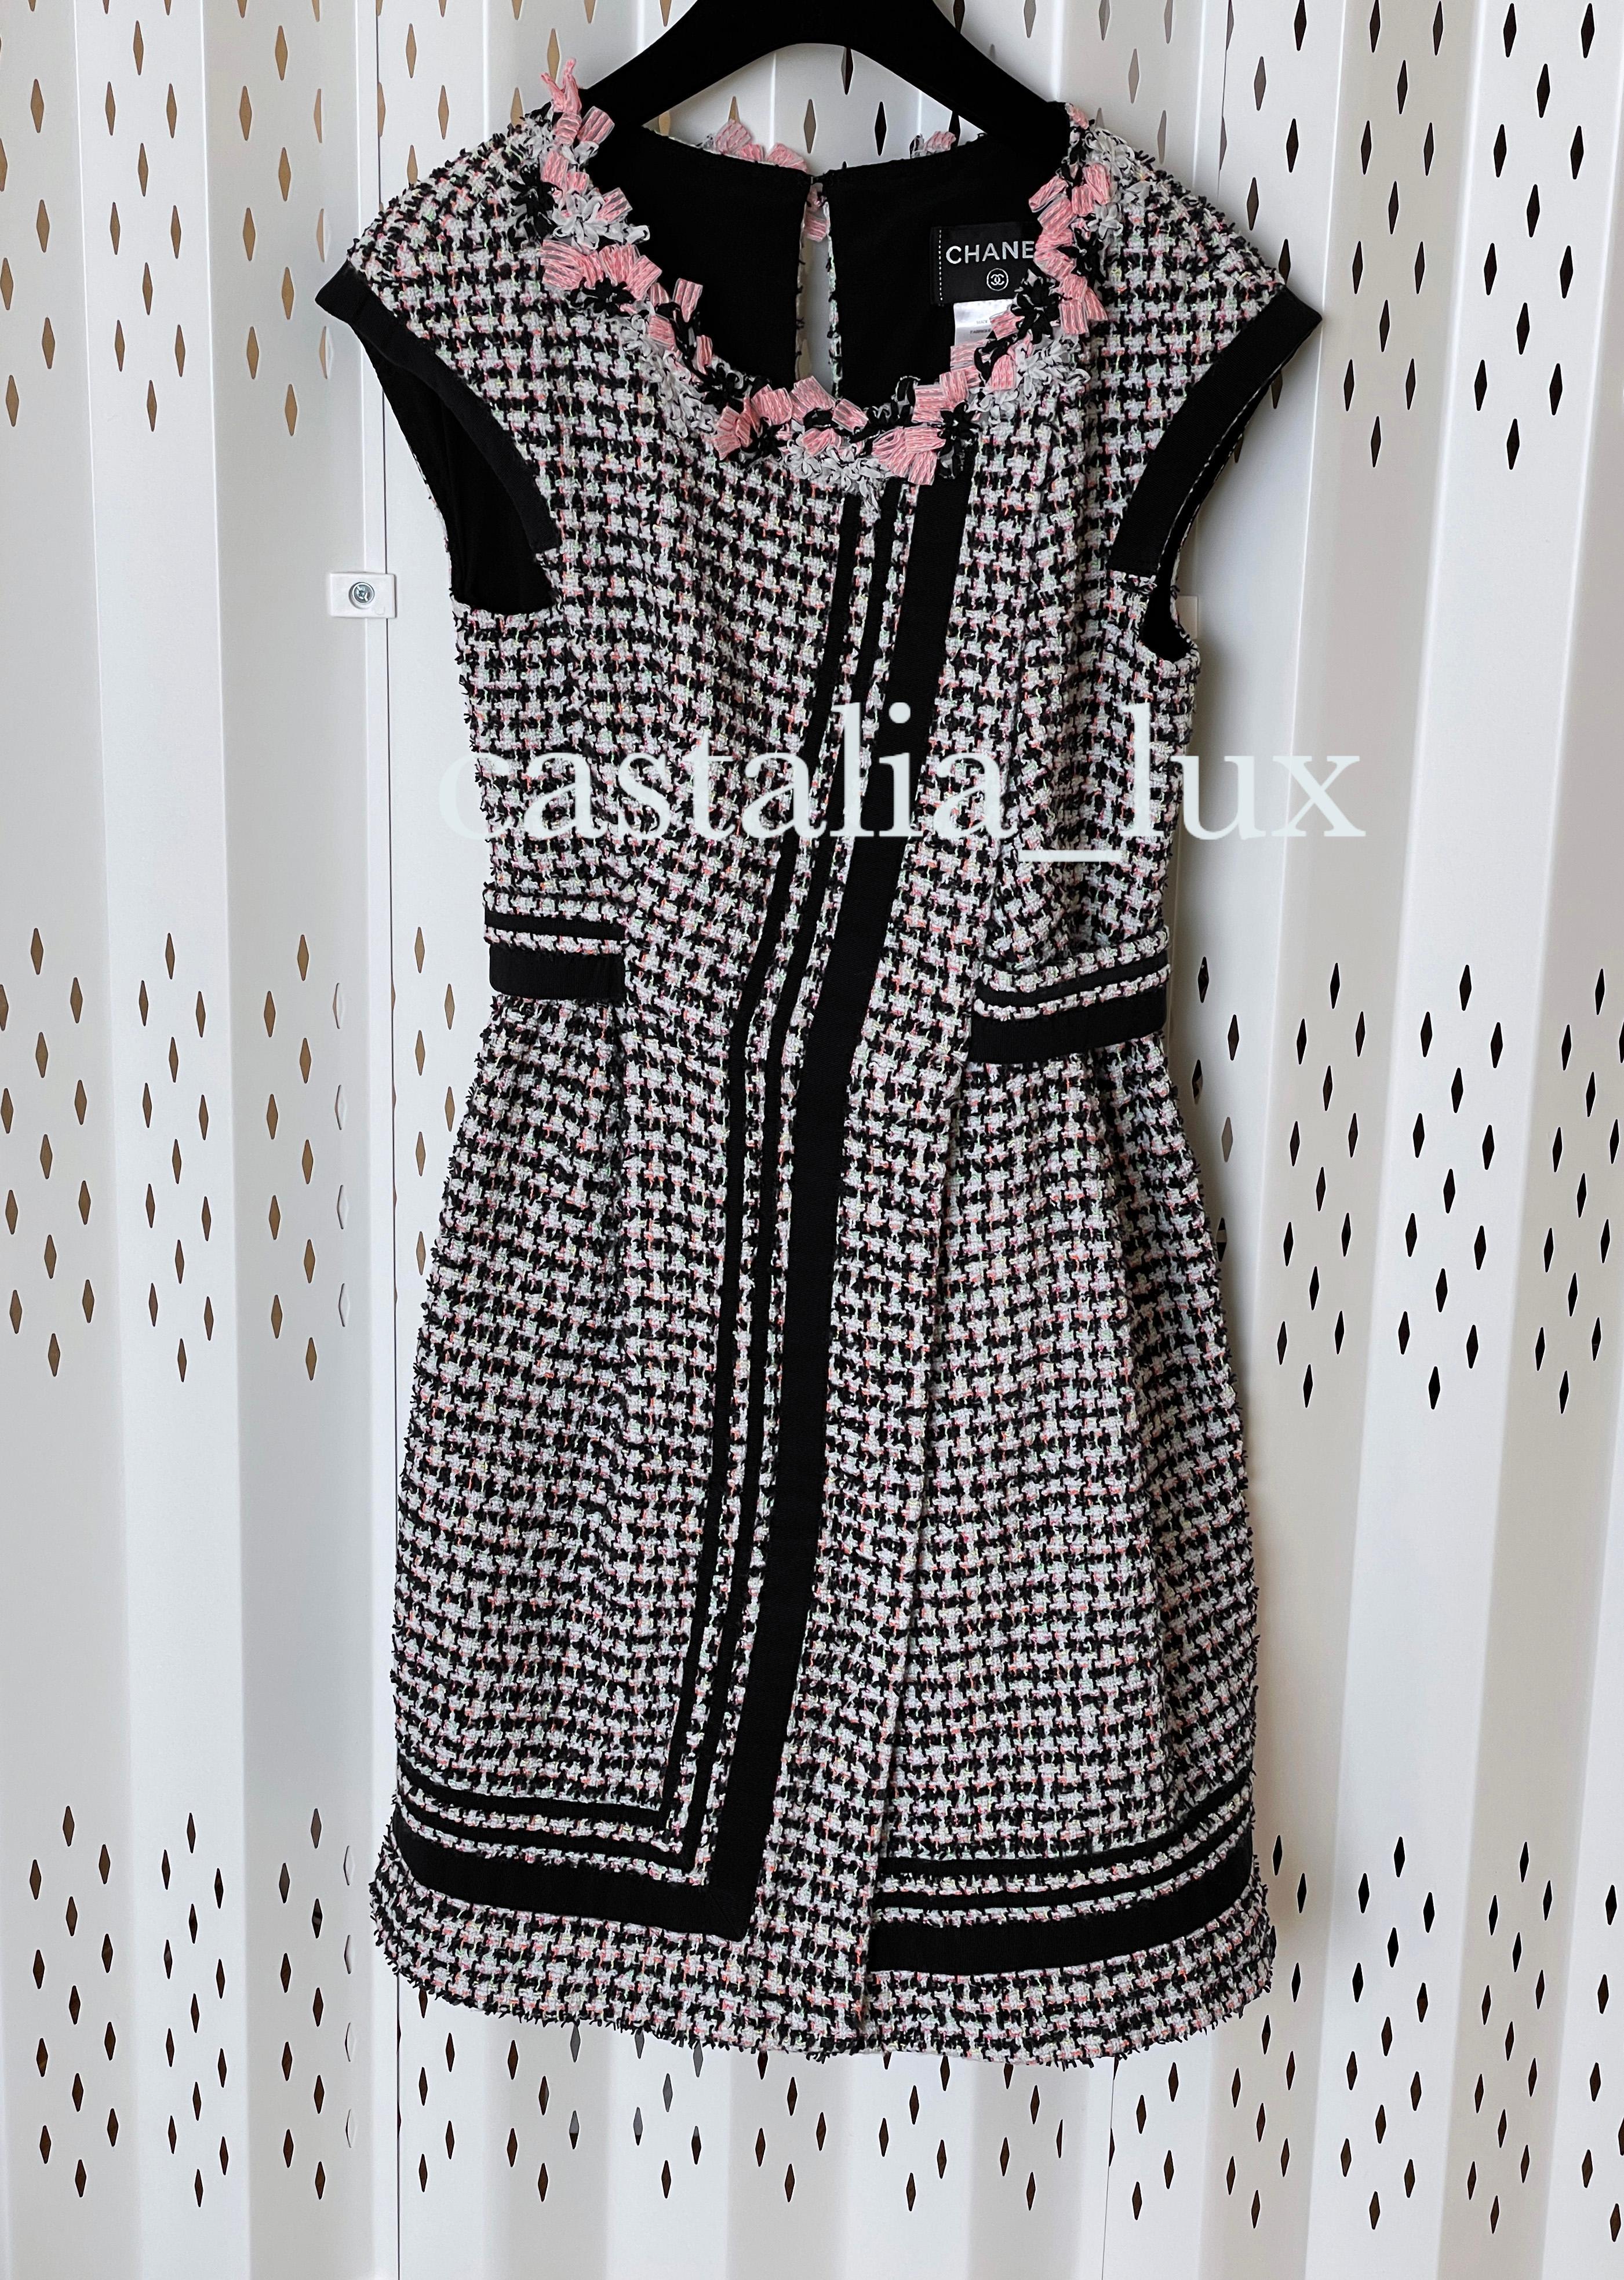 Rare Chanel Tweed Dress From 2010 Spring Collection. For Sale 2